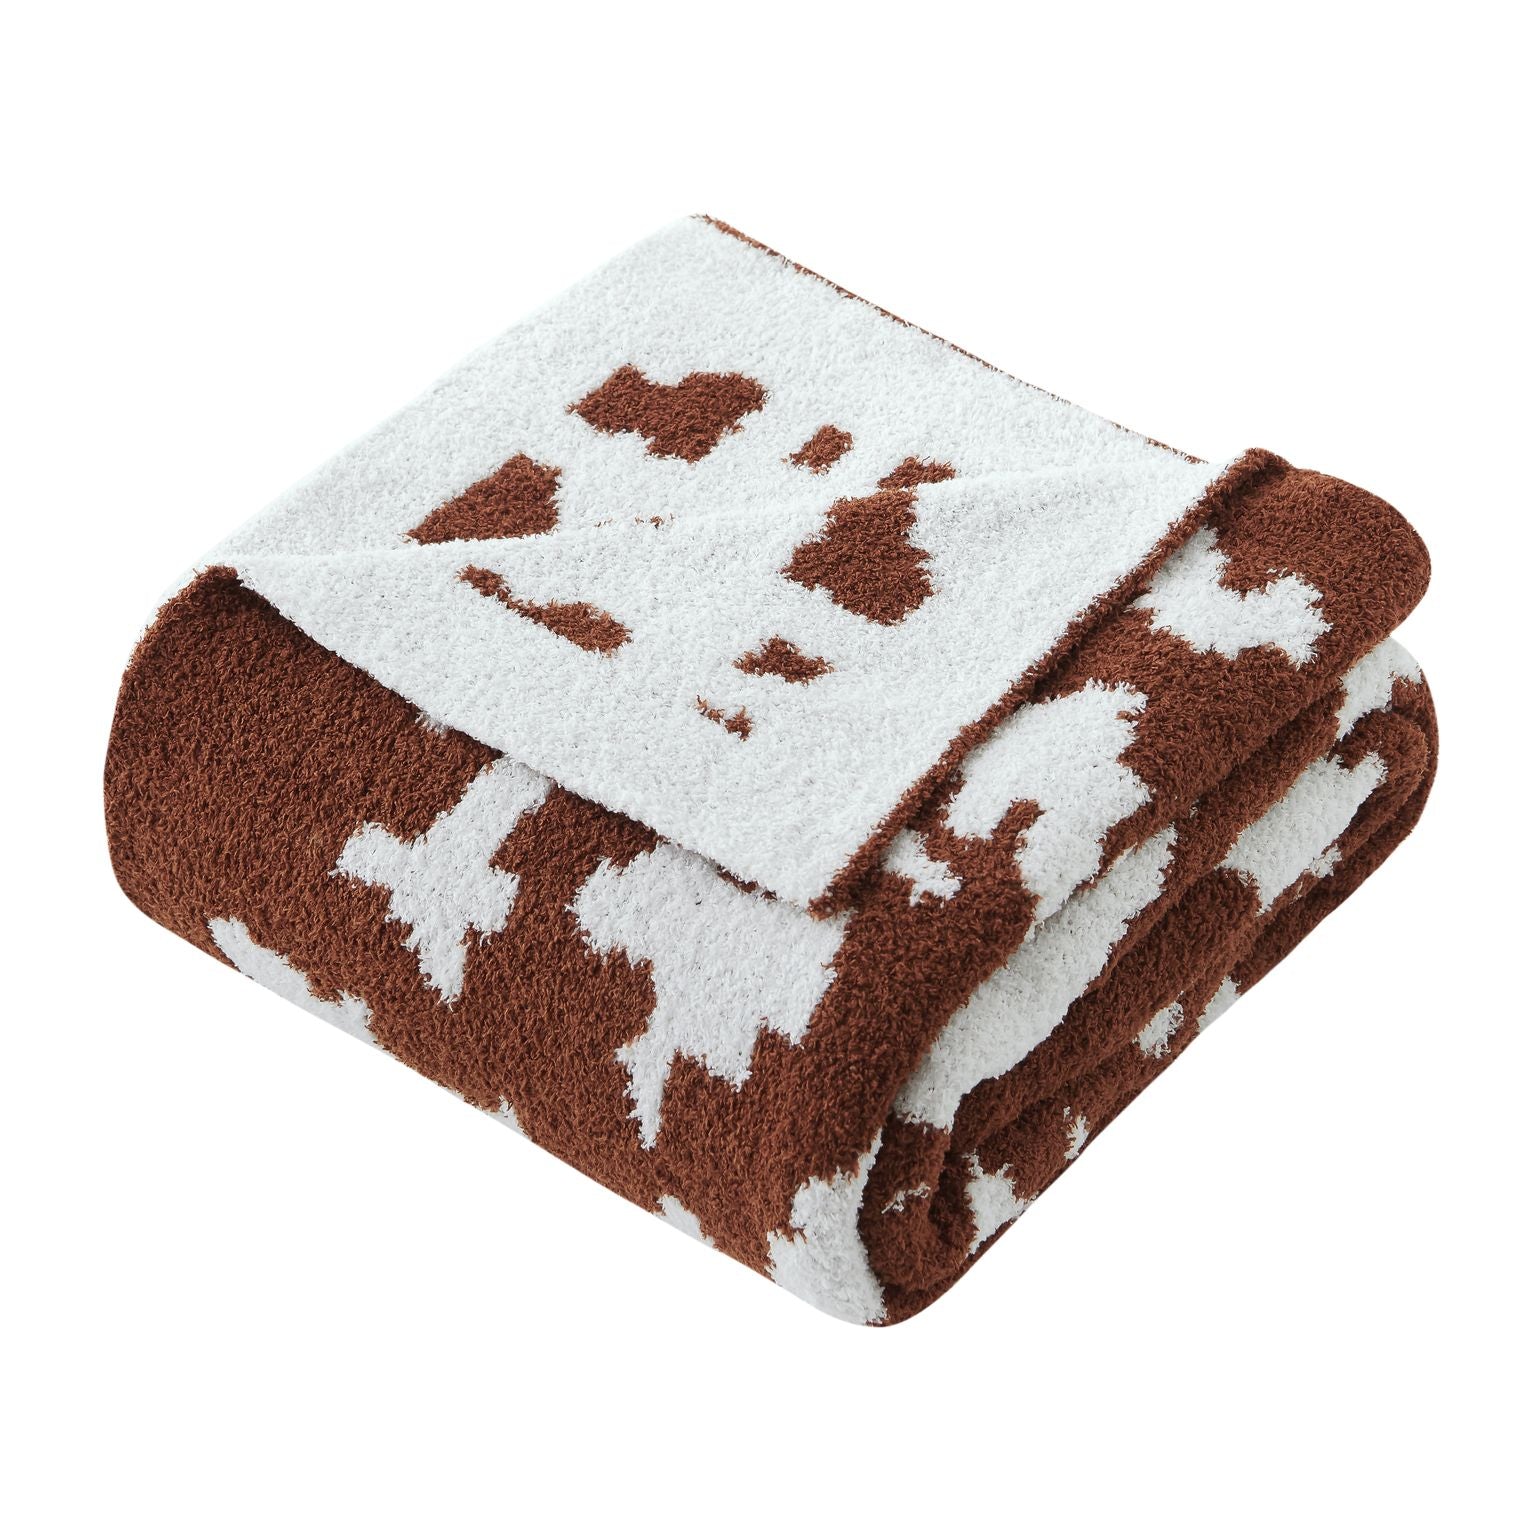 Jacquard Knit Throw Throw Blanket 50 x 60 inches Cow